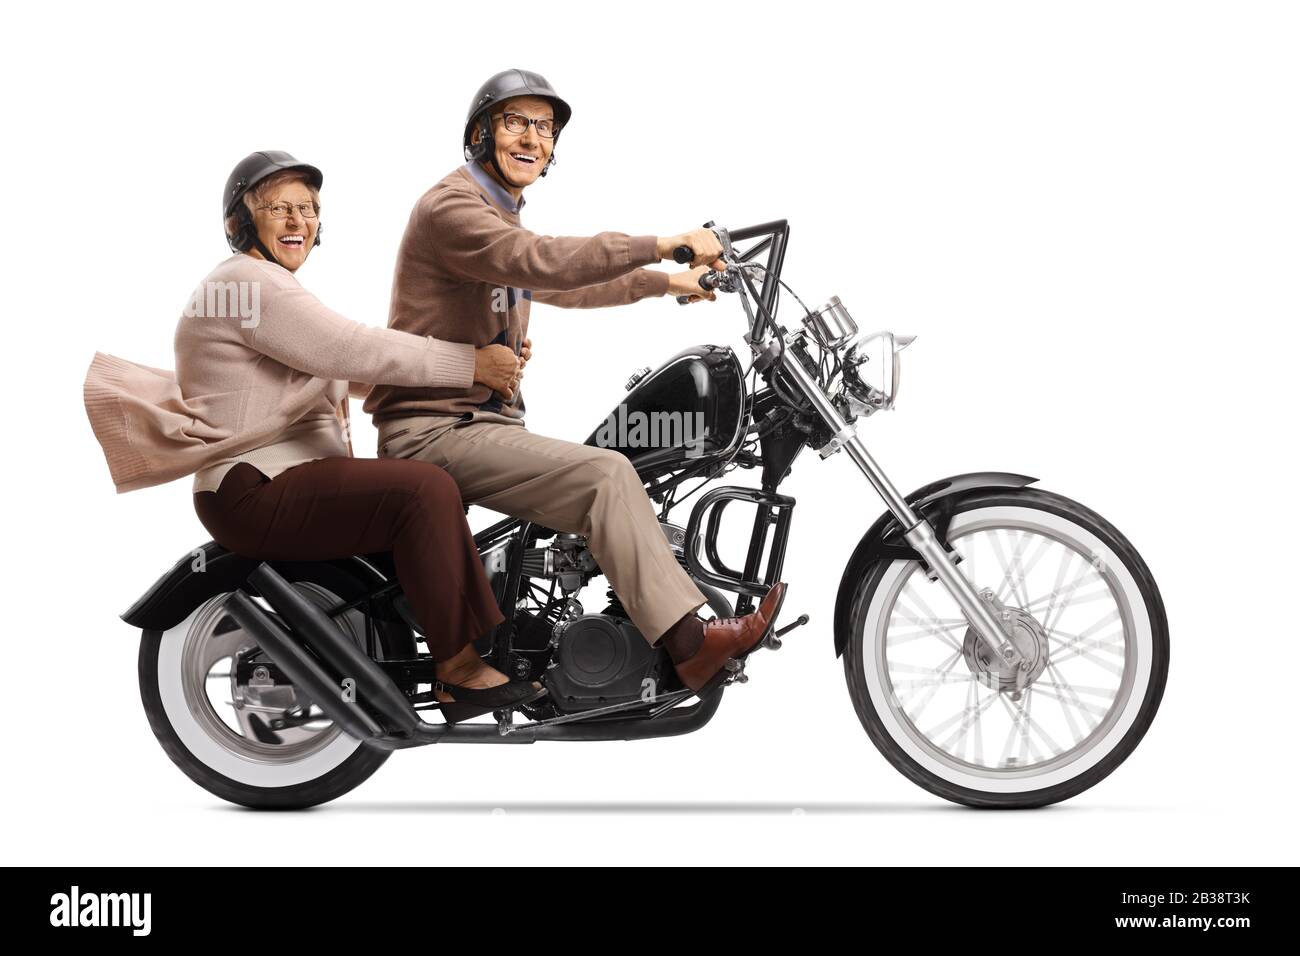 Cheerful senior man and woman riding a custom motorbike and smiling at the camera isolated on white background Stock Photo